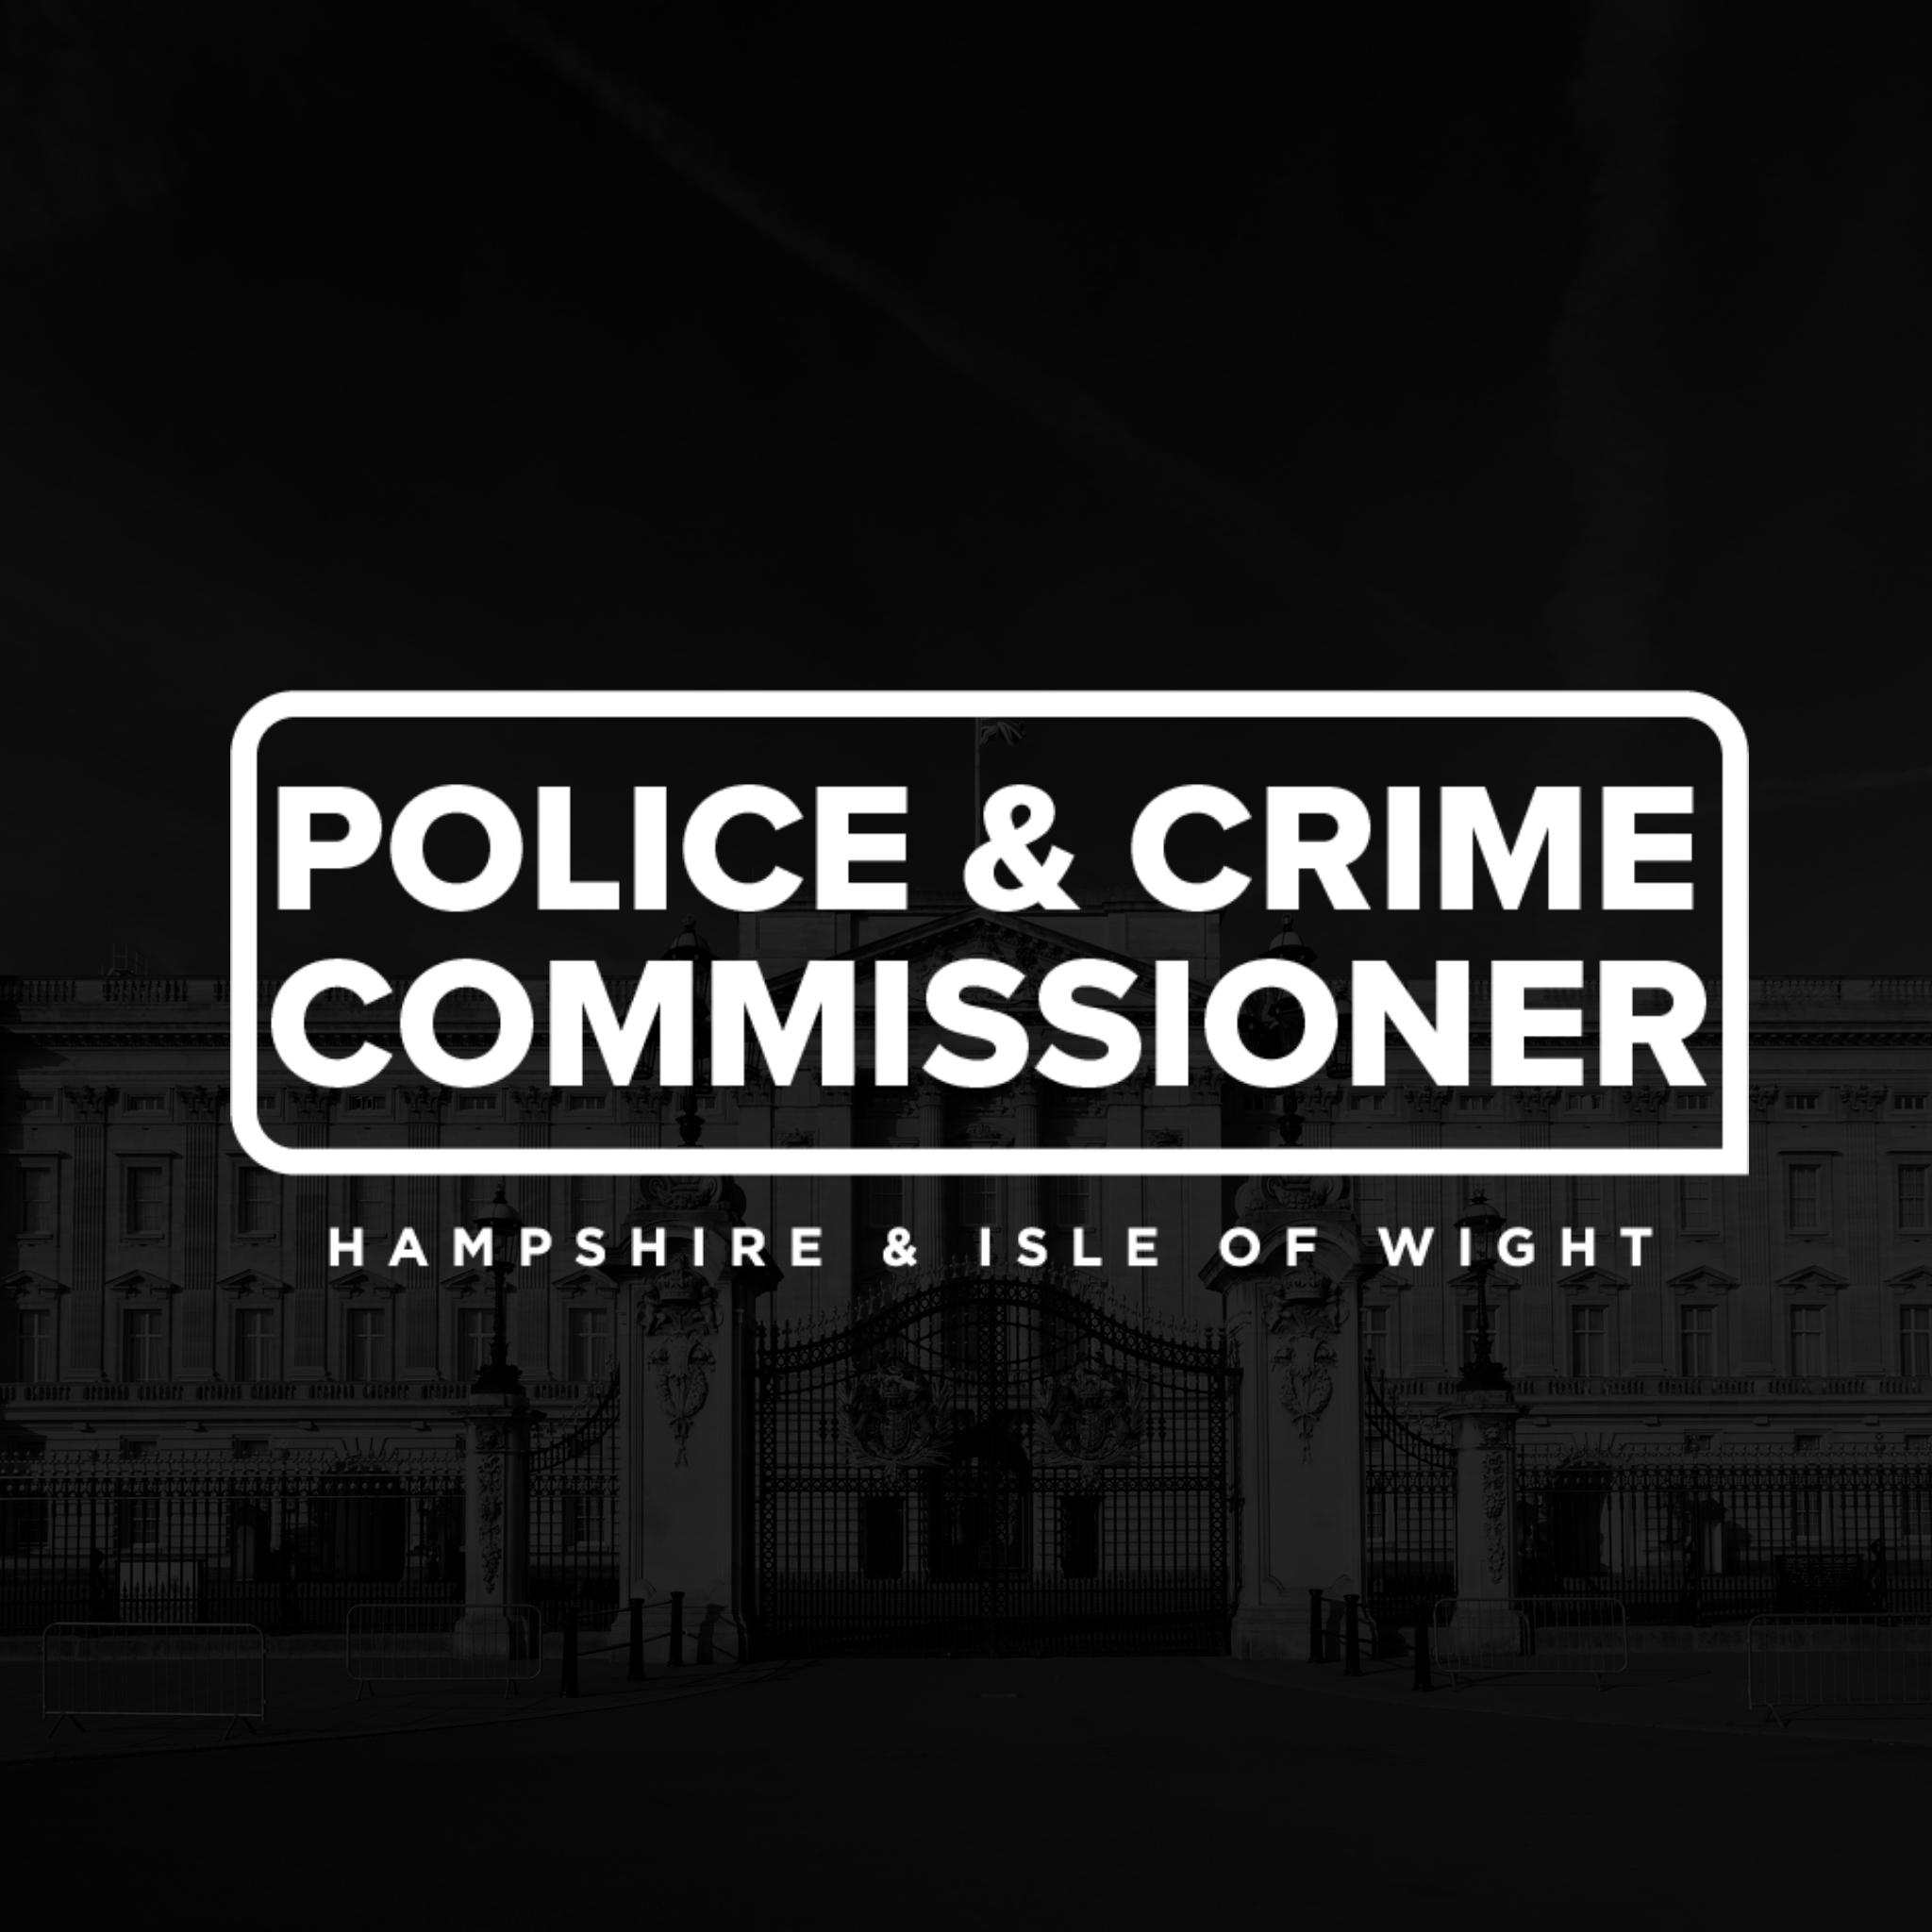 Logo of the office of the Police and Crime commissioner for Hampshire and Isle of Wight in mourning colours.